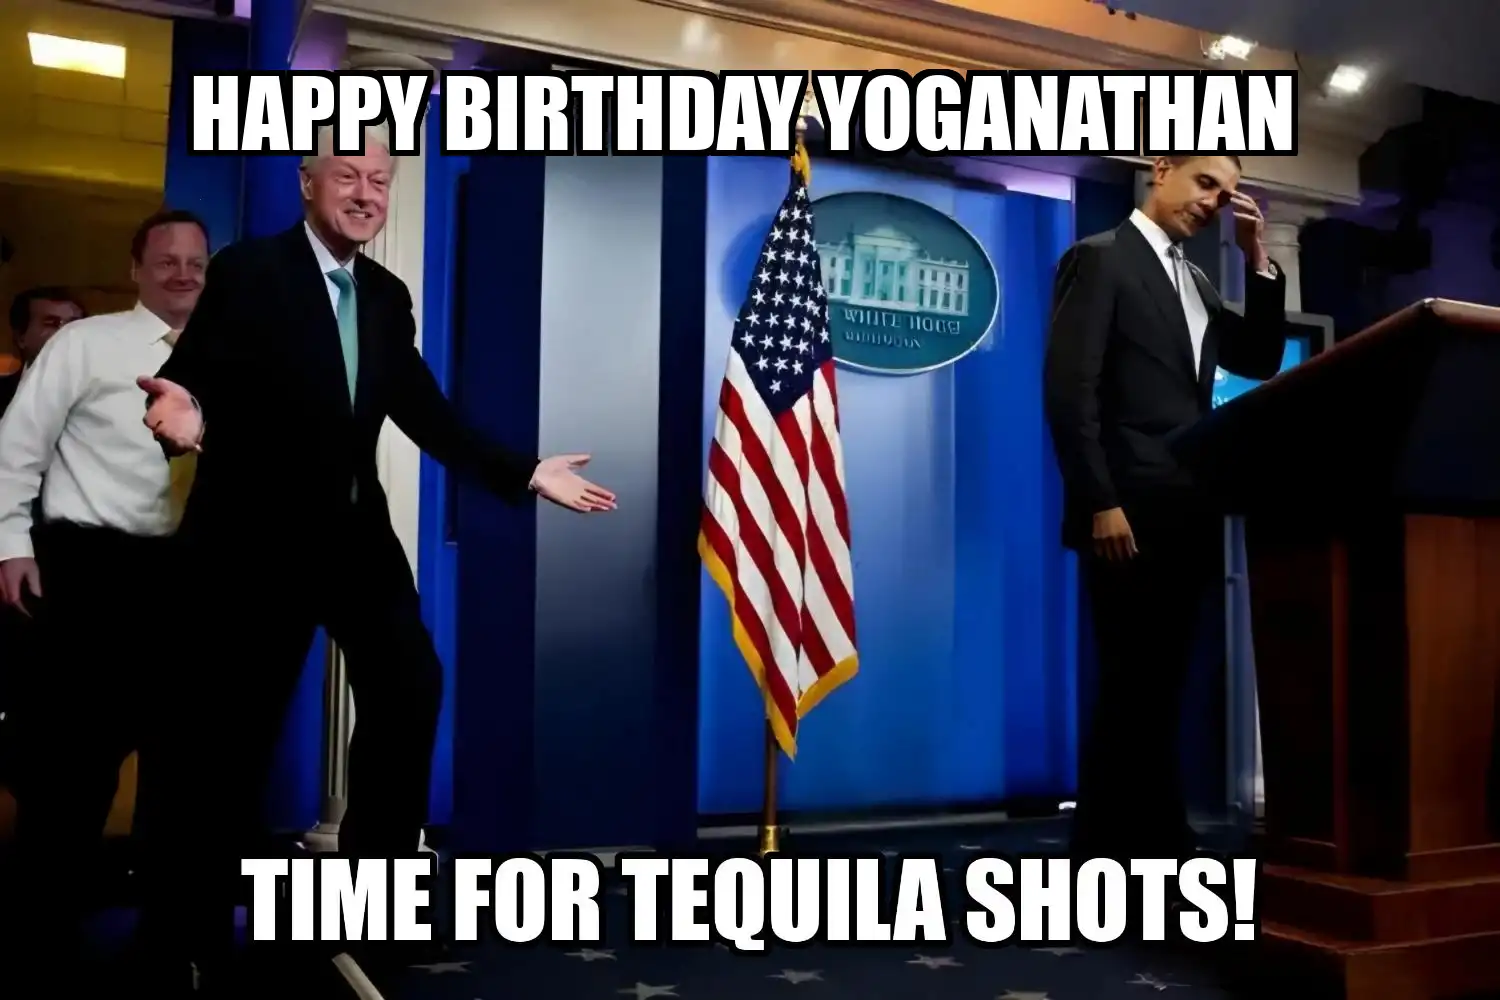 Happy Birthday Yoganathan Time For Tequila Shots Memes